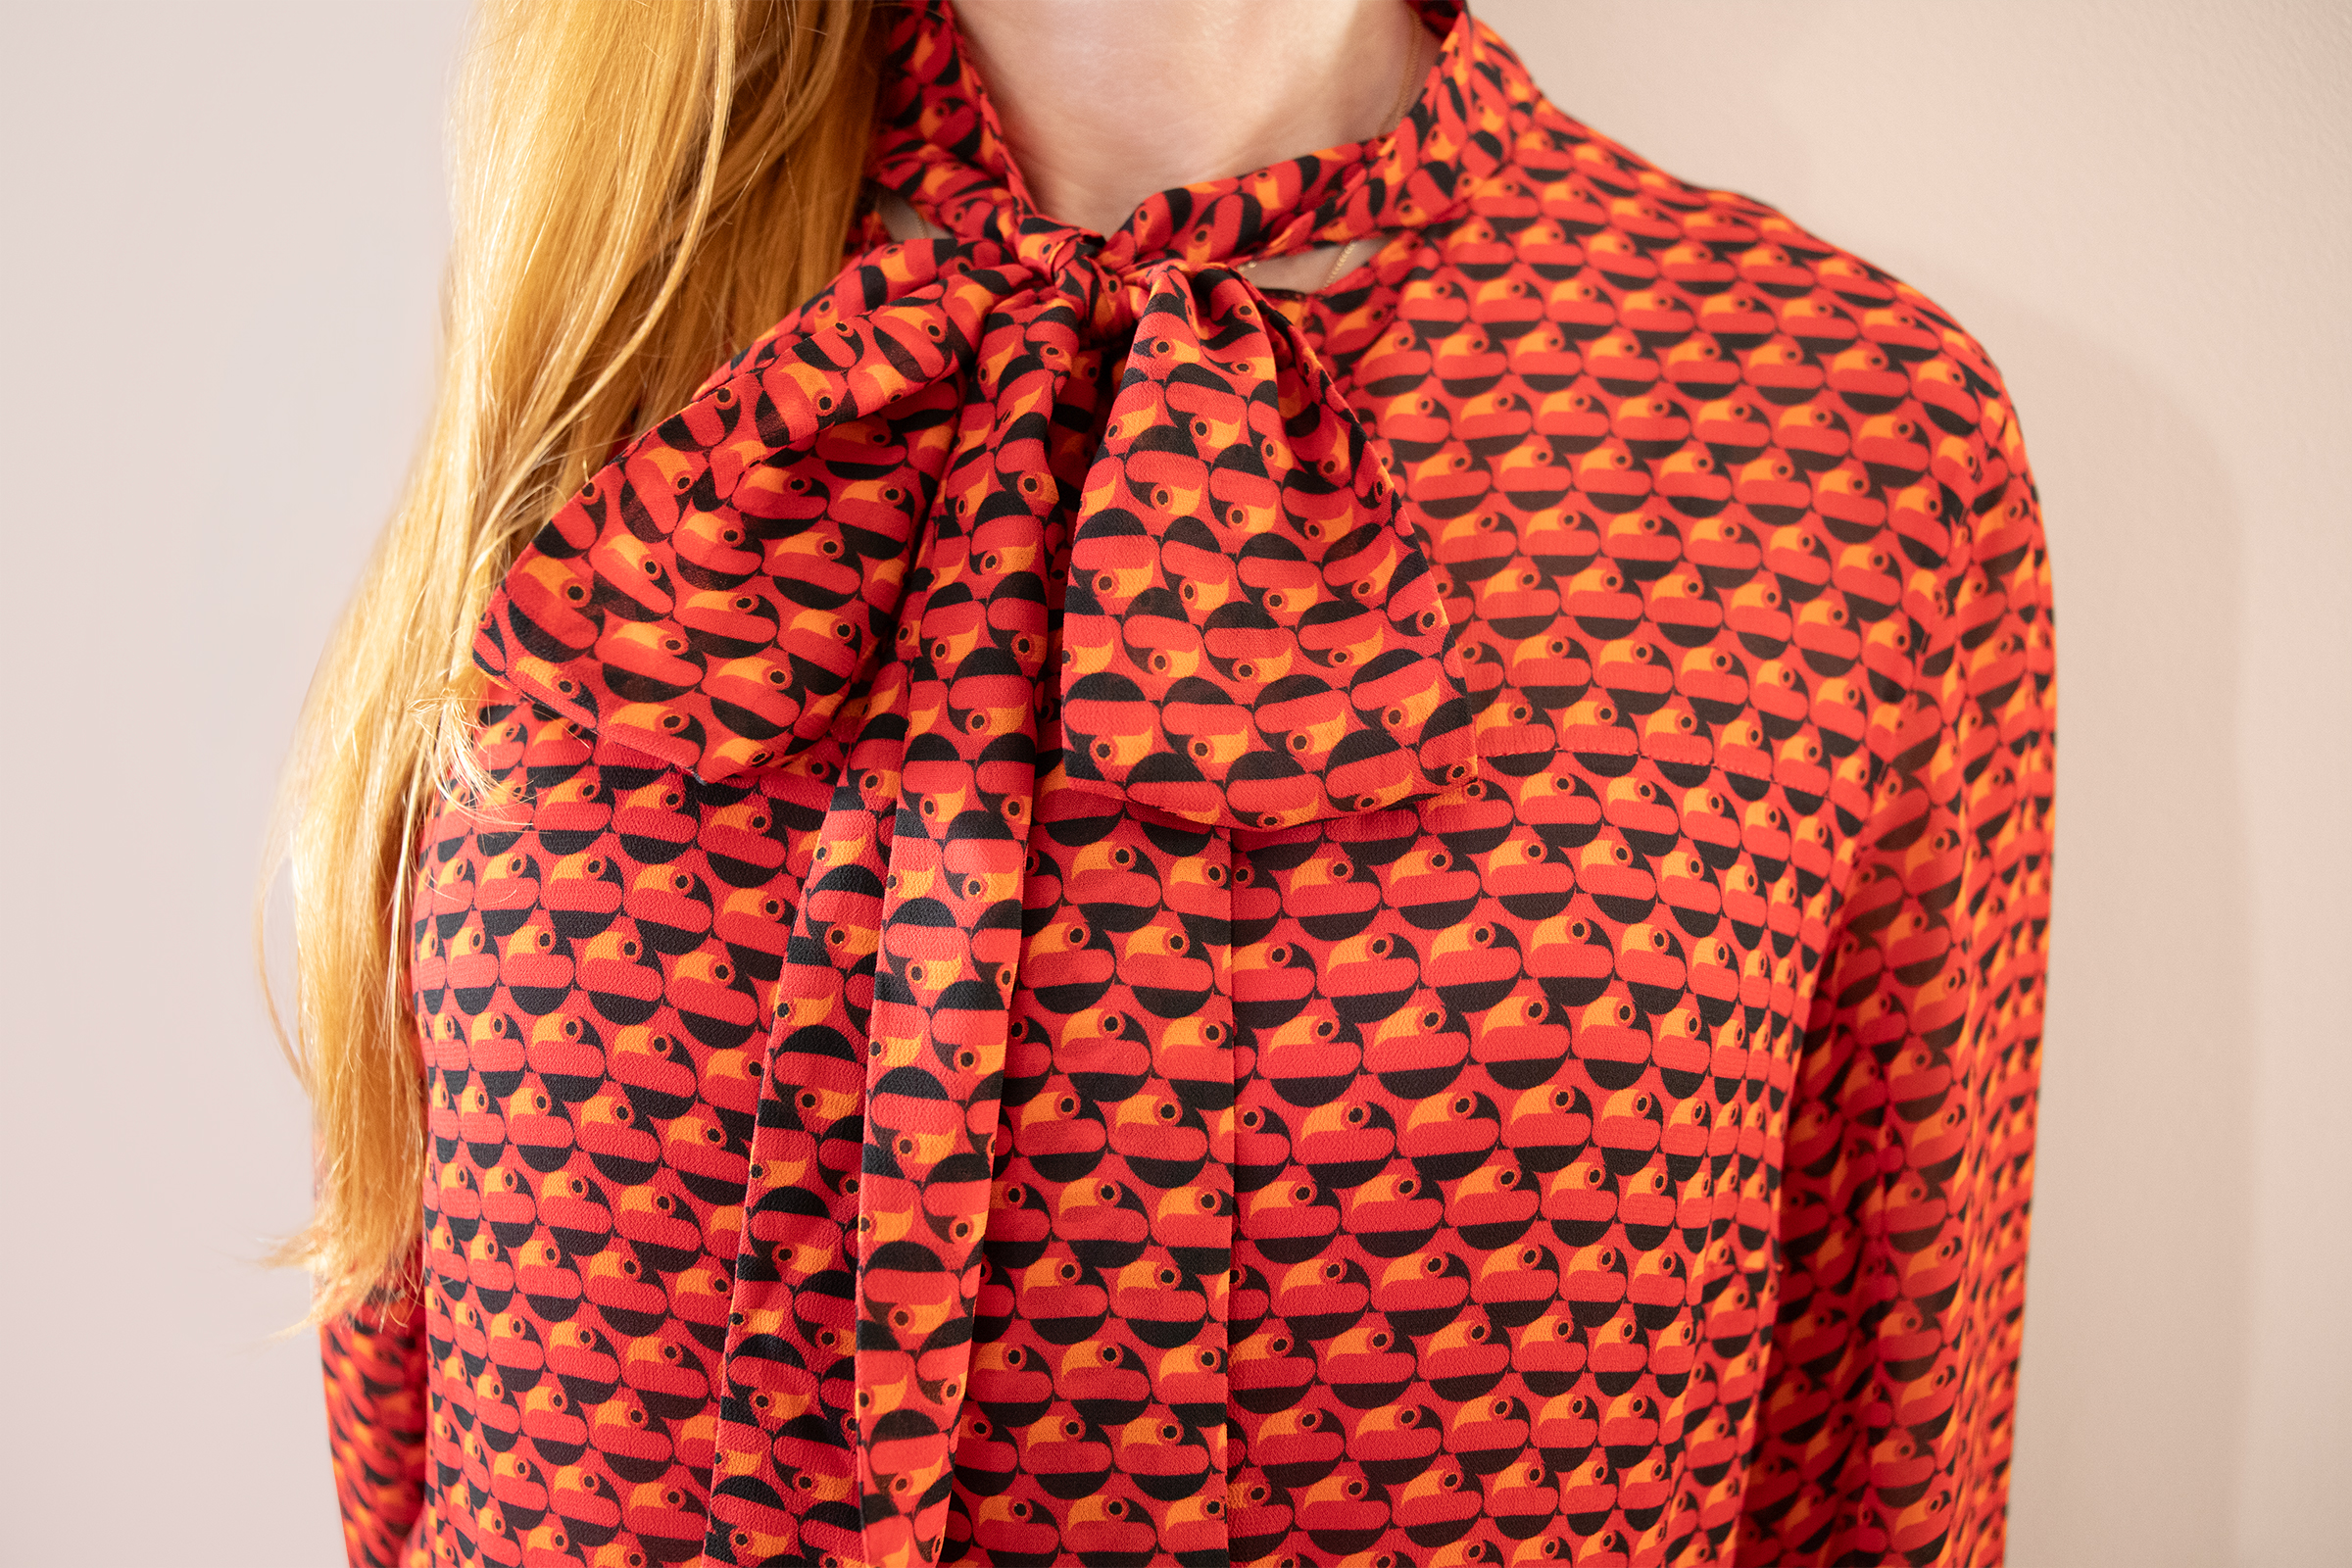 red haired woman wearing a red dress with close up on a bow tie with orange and black bird pattern